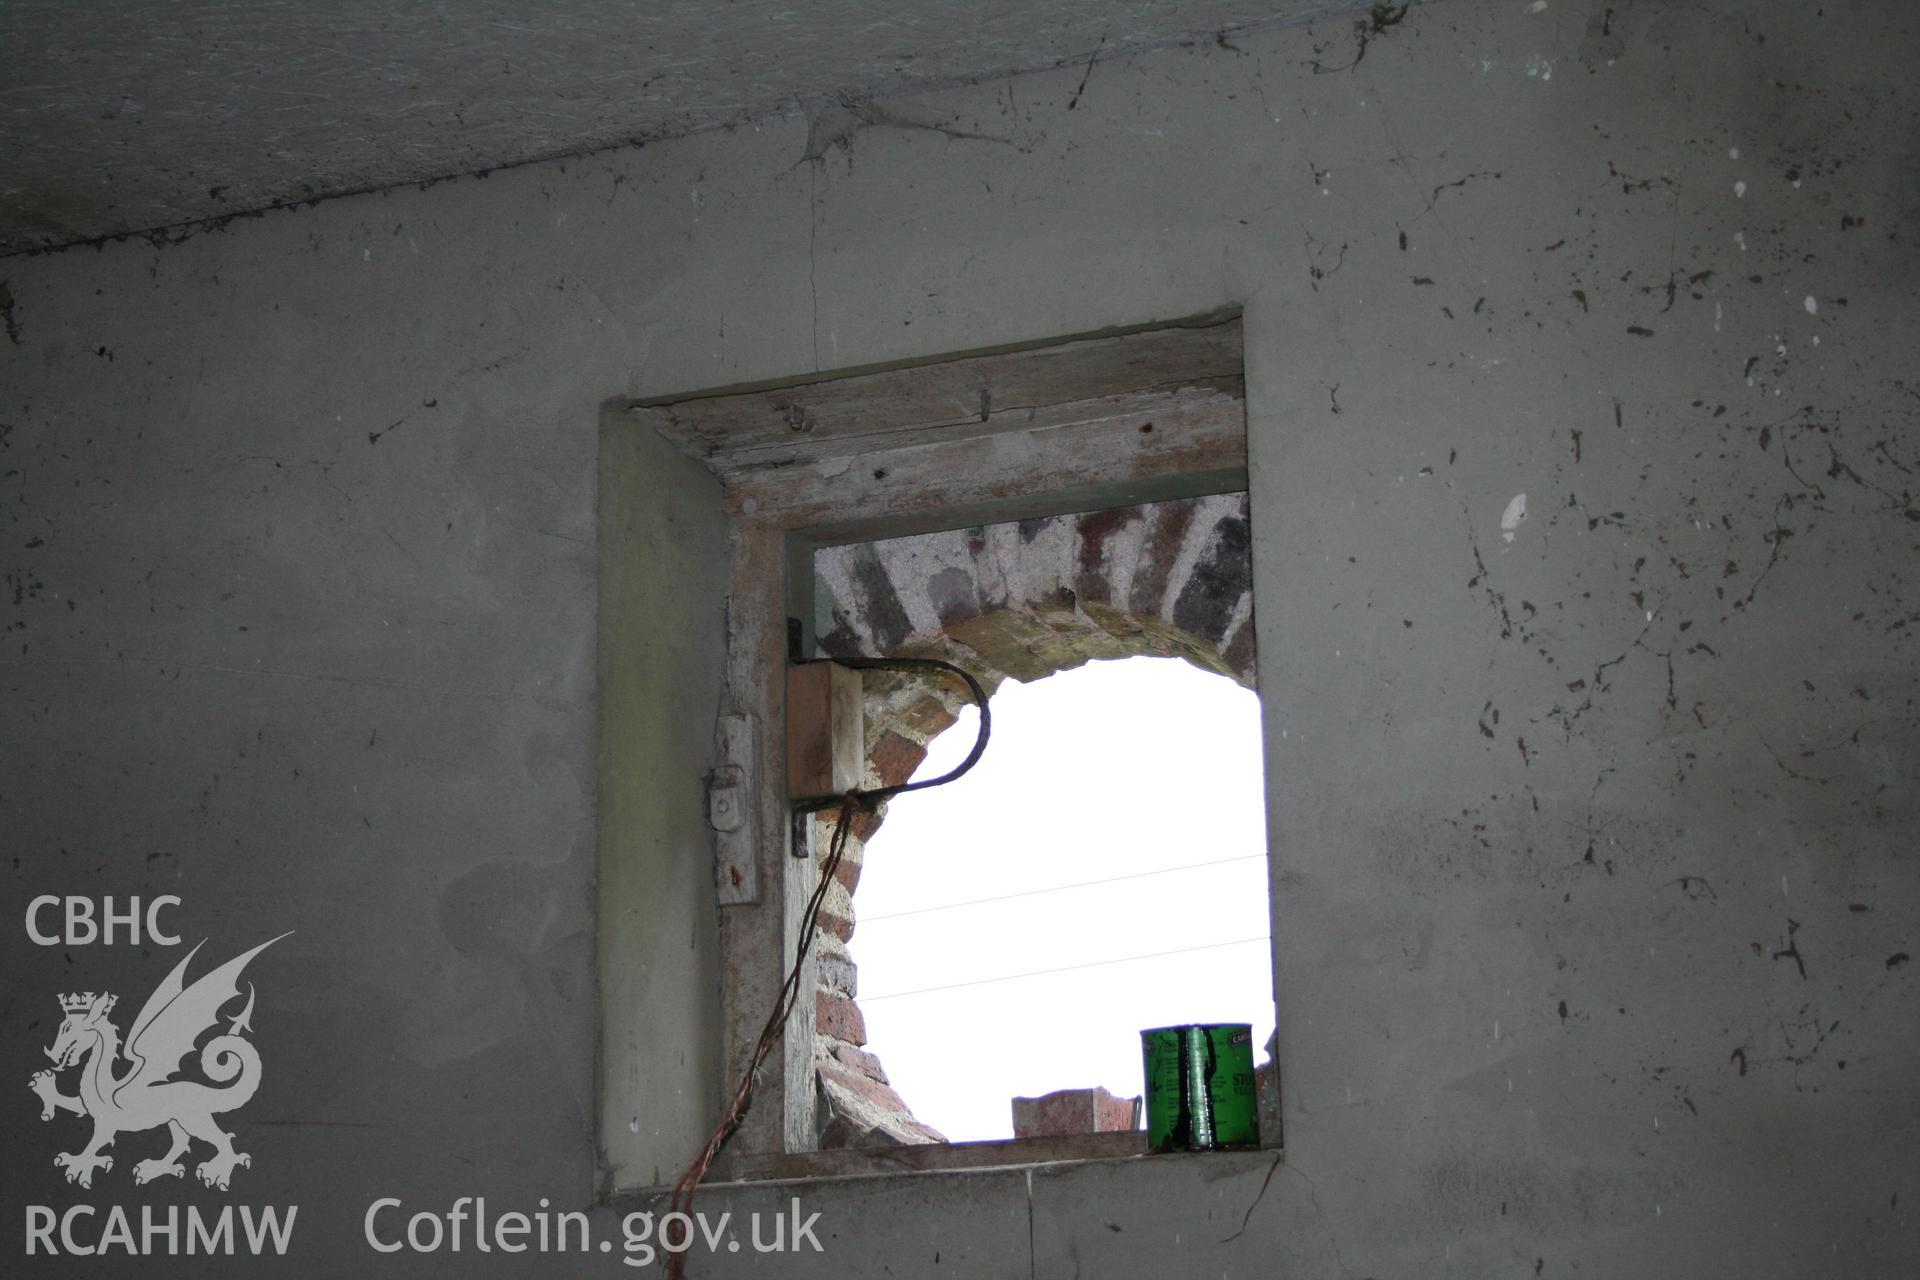 Interior view of engineering brick circular window. Photographic survey of the southern range of cowhouses at Tan-y-Graig Farm, Llanfarian. Conducted by Geoff Ward and John Wiles, 11th December 2006.